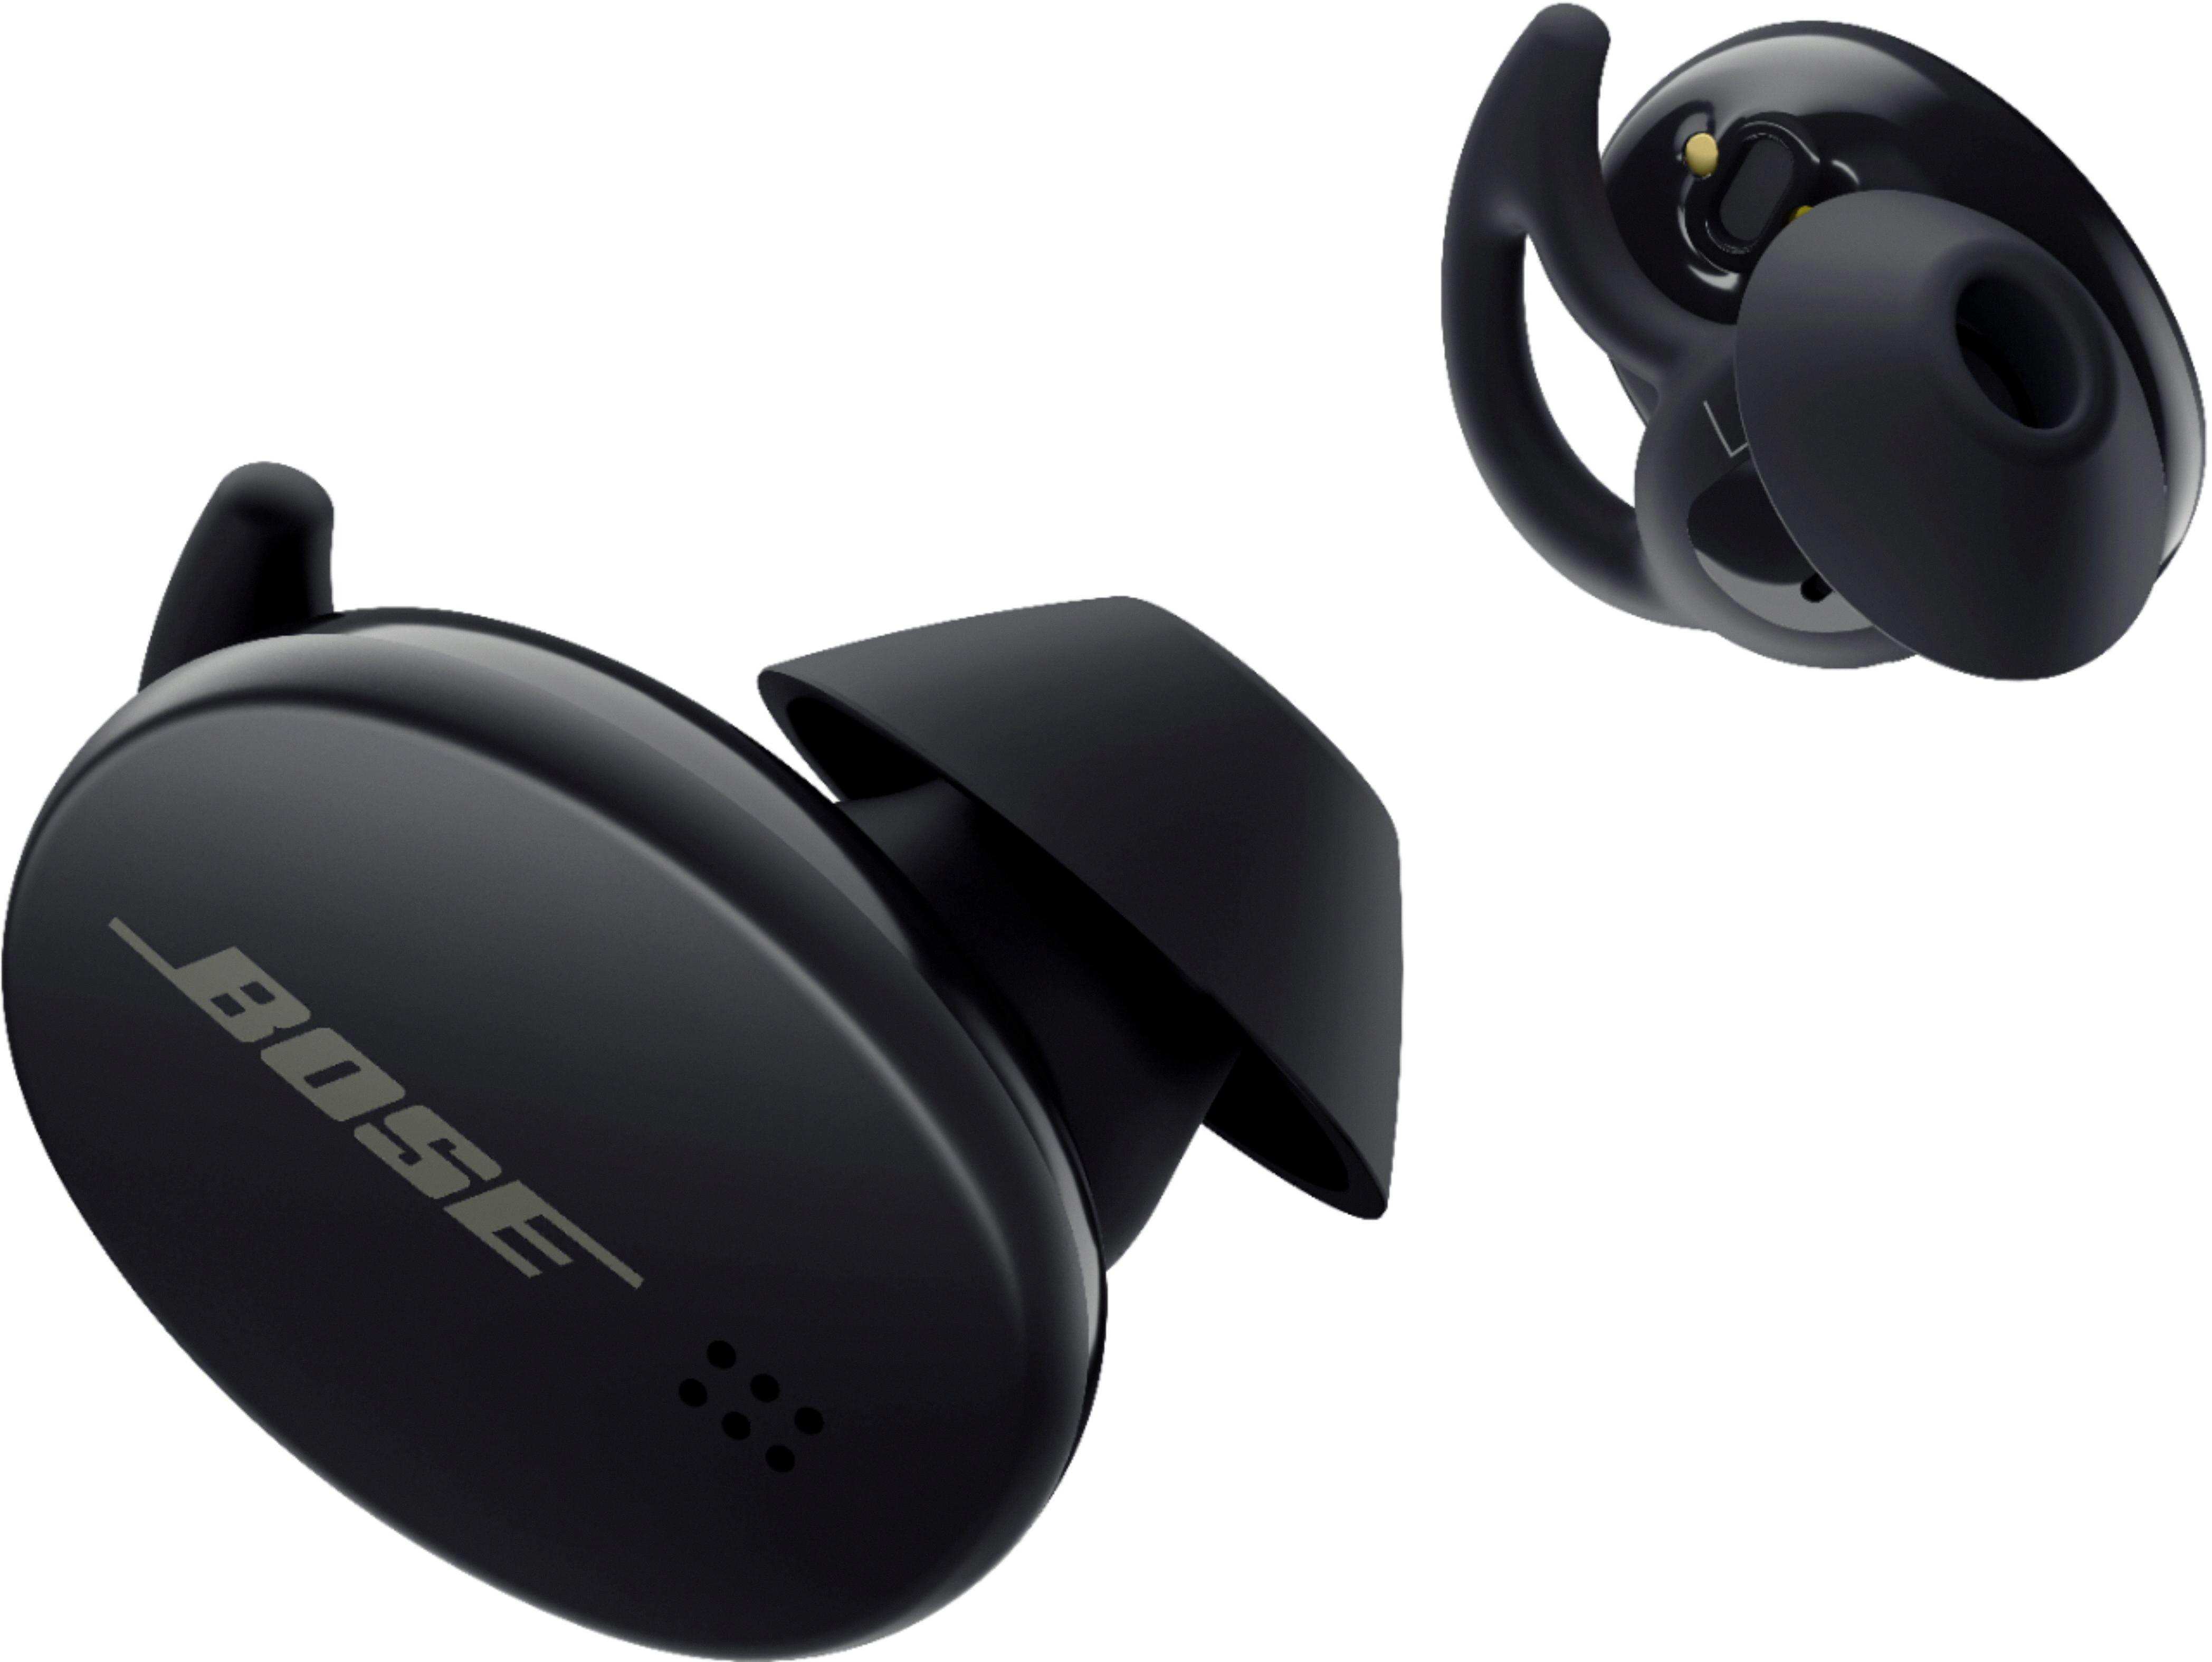 How to Pair Bose Earbuds for Audio Enjoyment 7